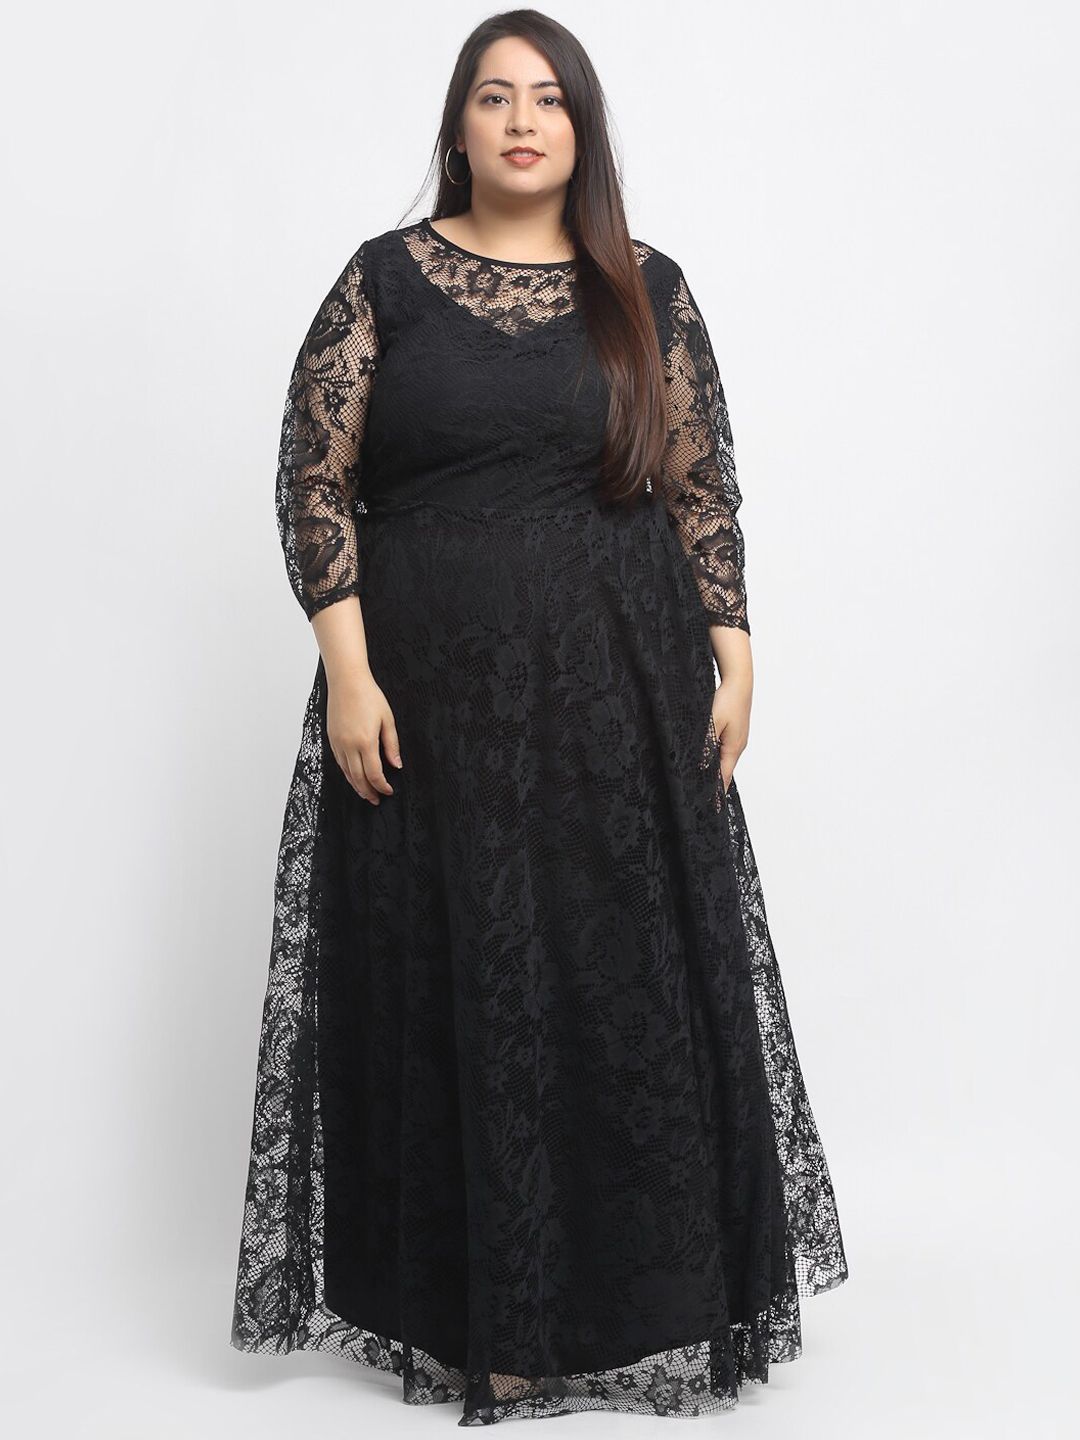 Flambeur Black Floral Lace Maxi Dress Price in India